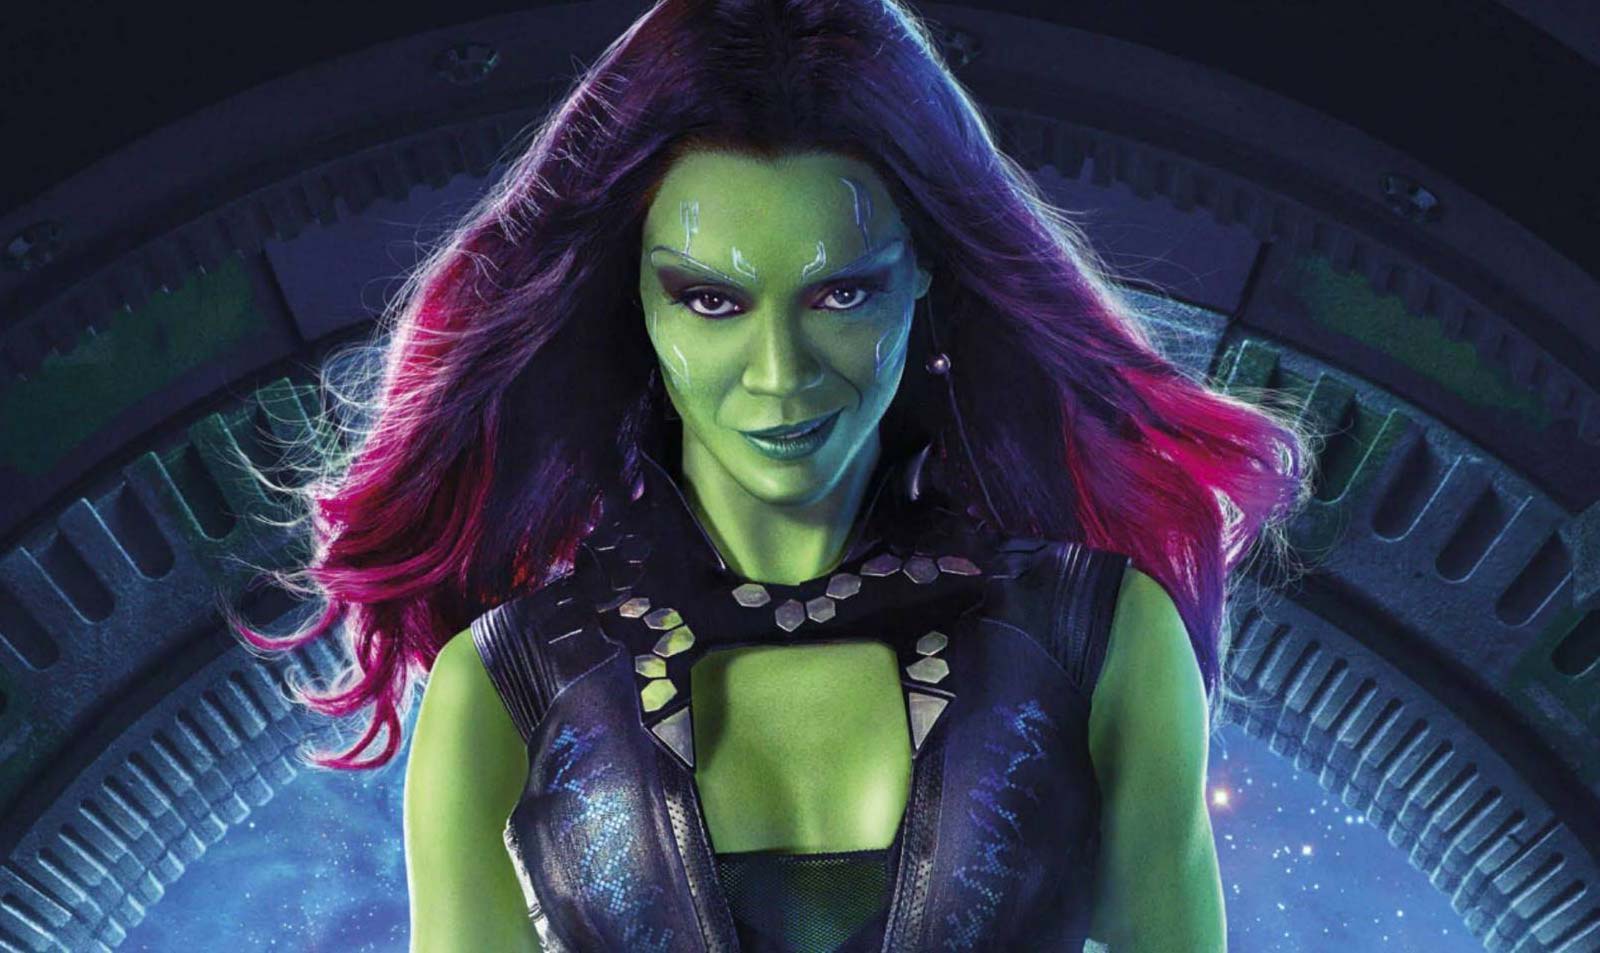 🌎 Only a Real Marvel Fan Can Match These Characters With Their Home Planets Gamora